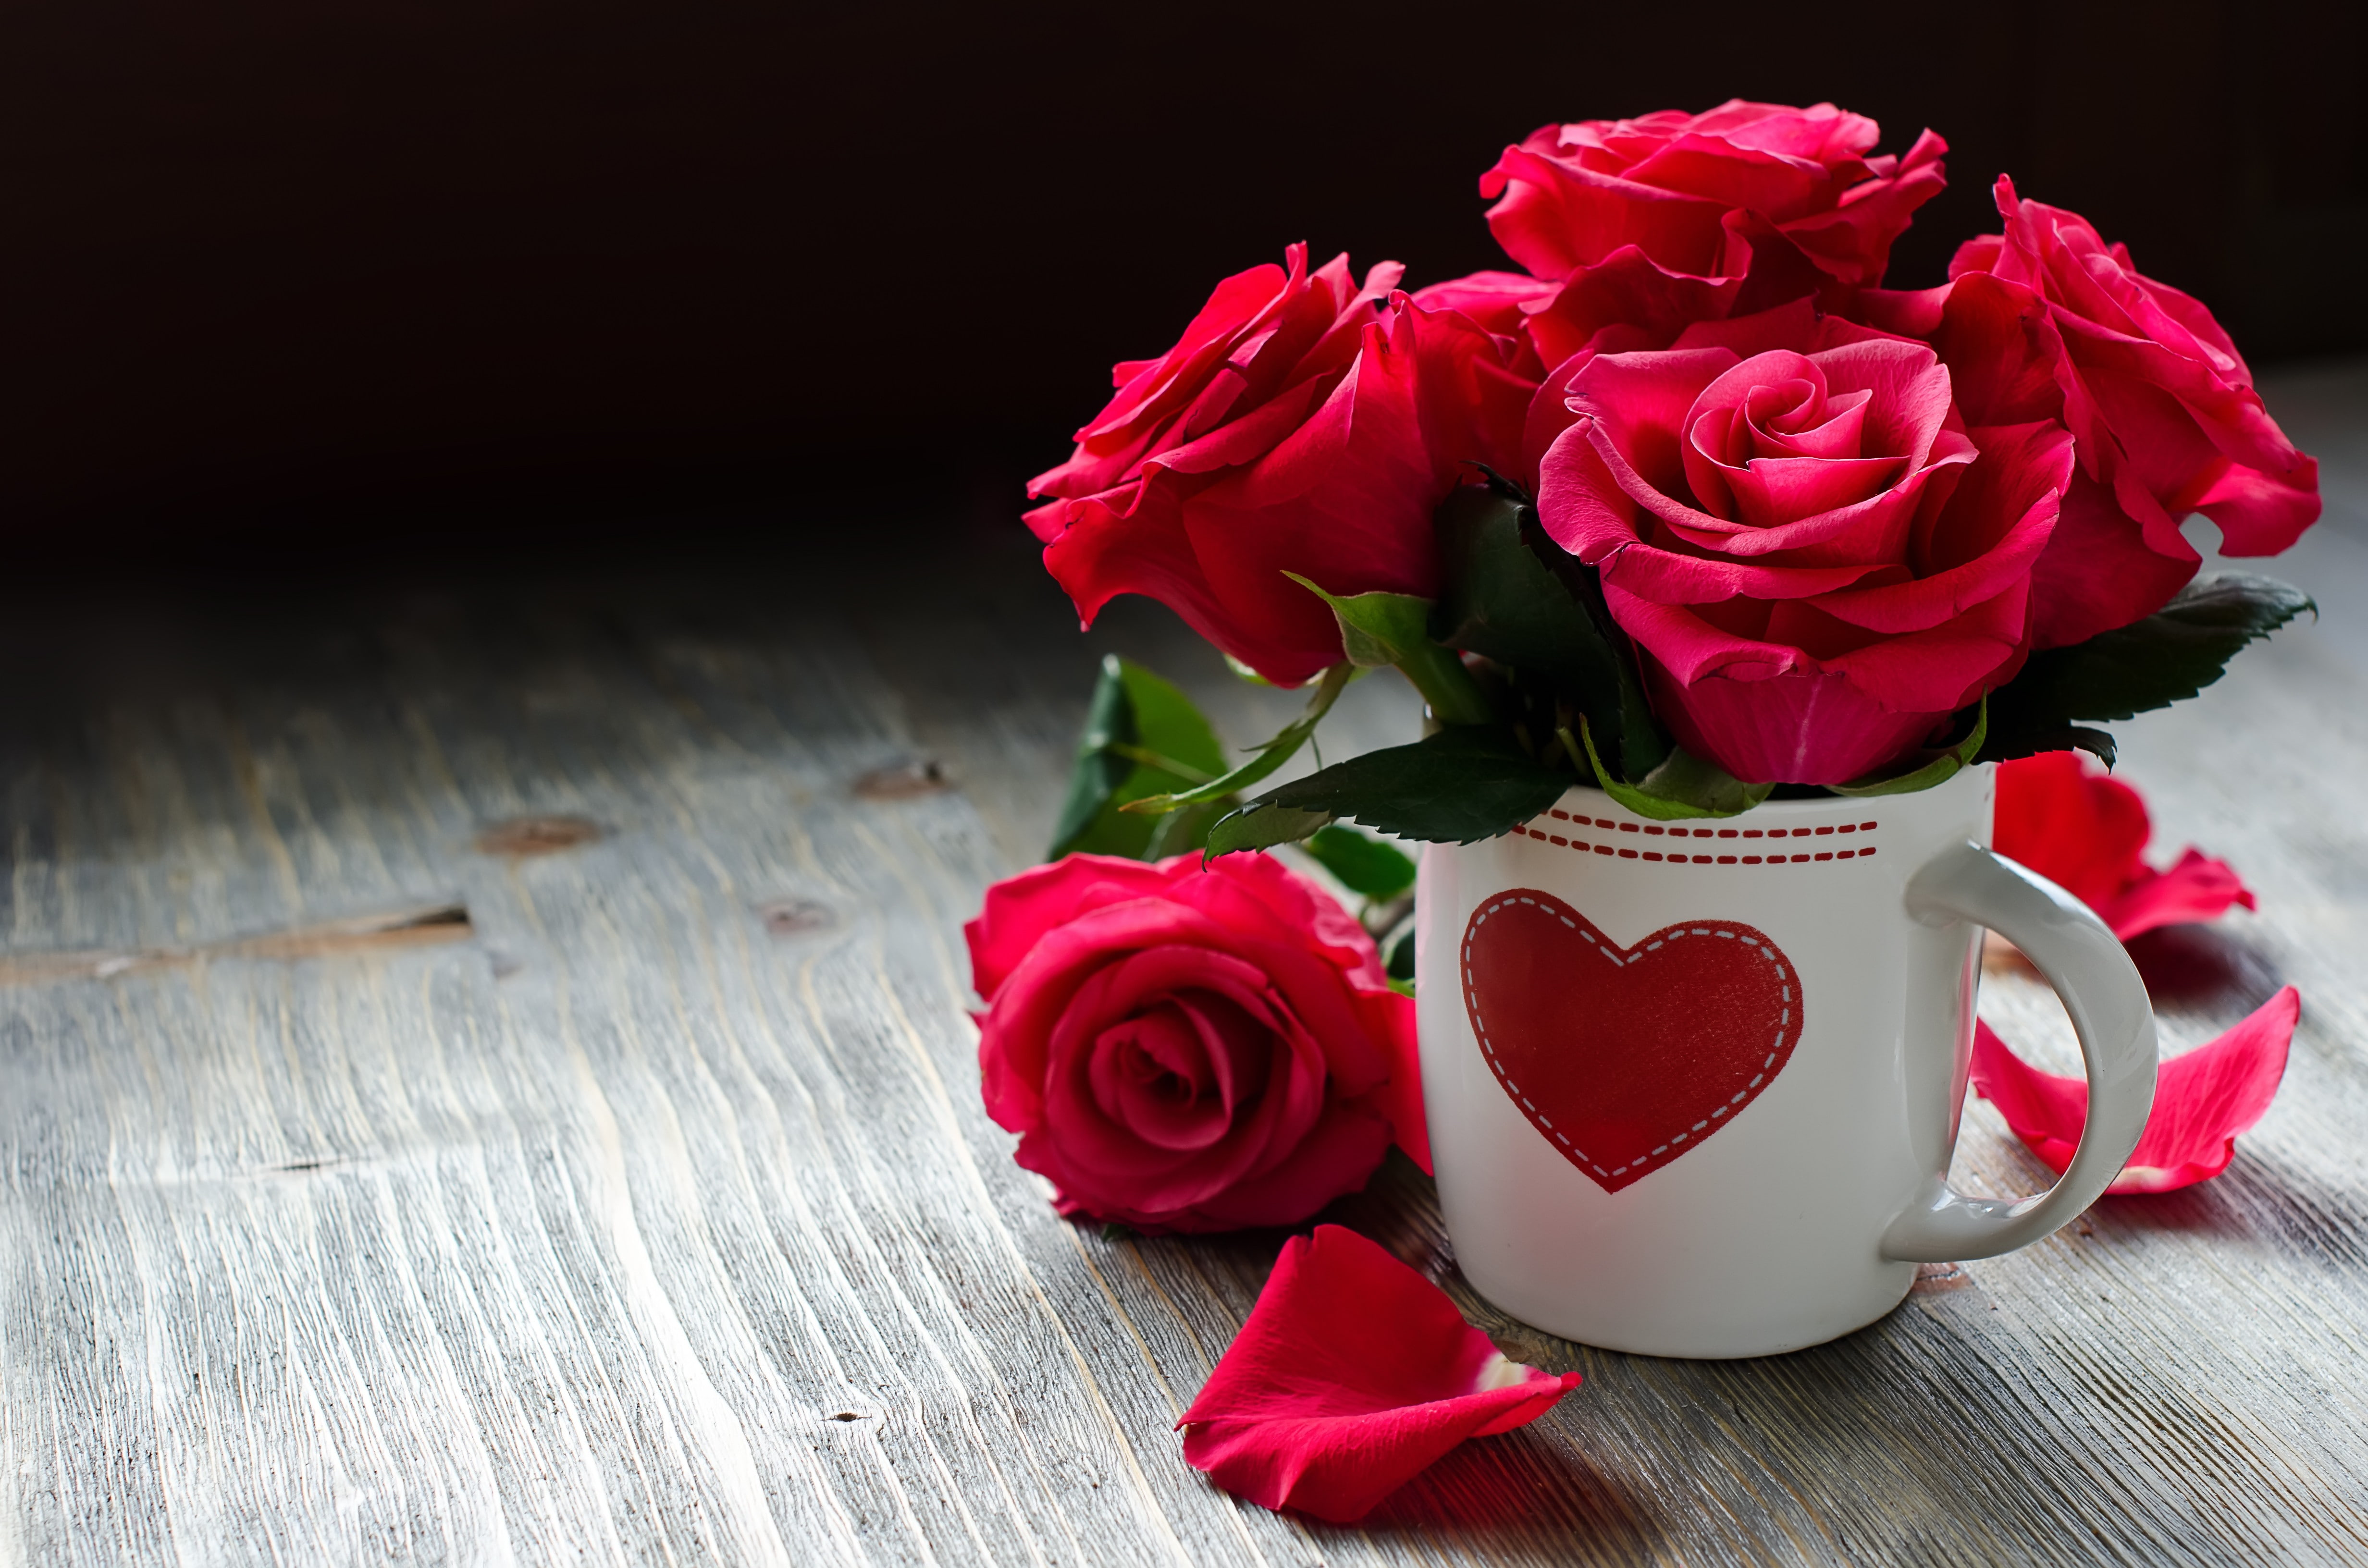 Roses, flowers, heart, red rose with white ceramic coffee cup